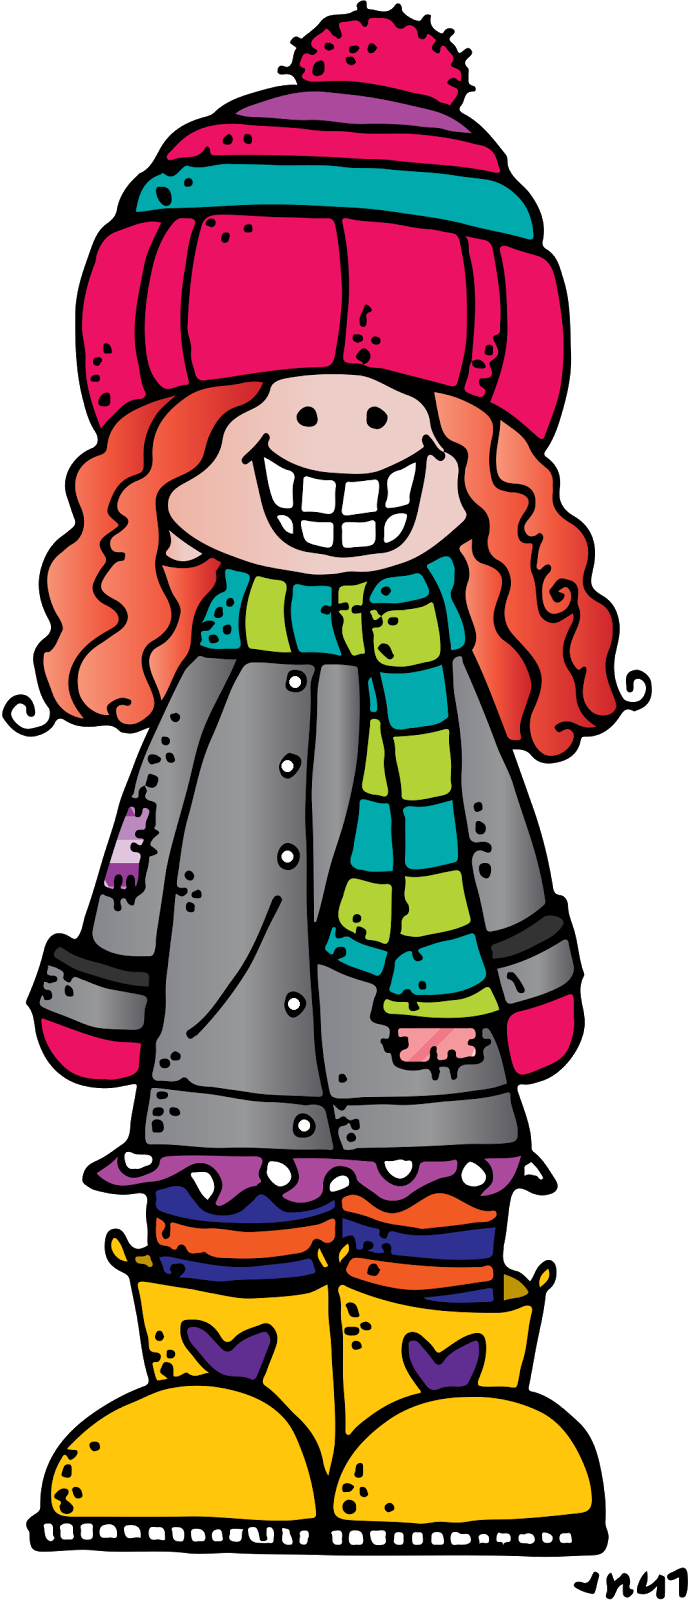 Colorful Winter Clothing Cartoon